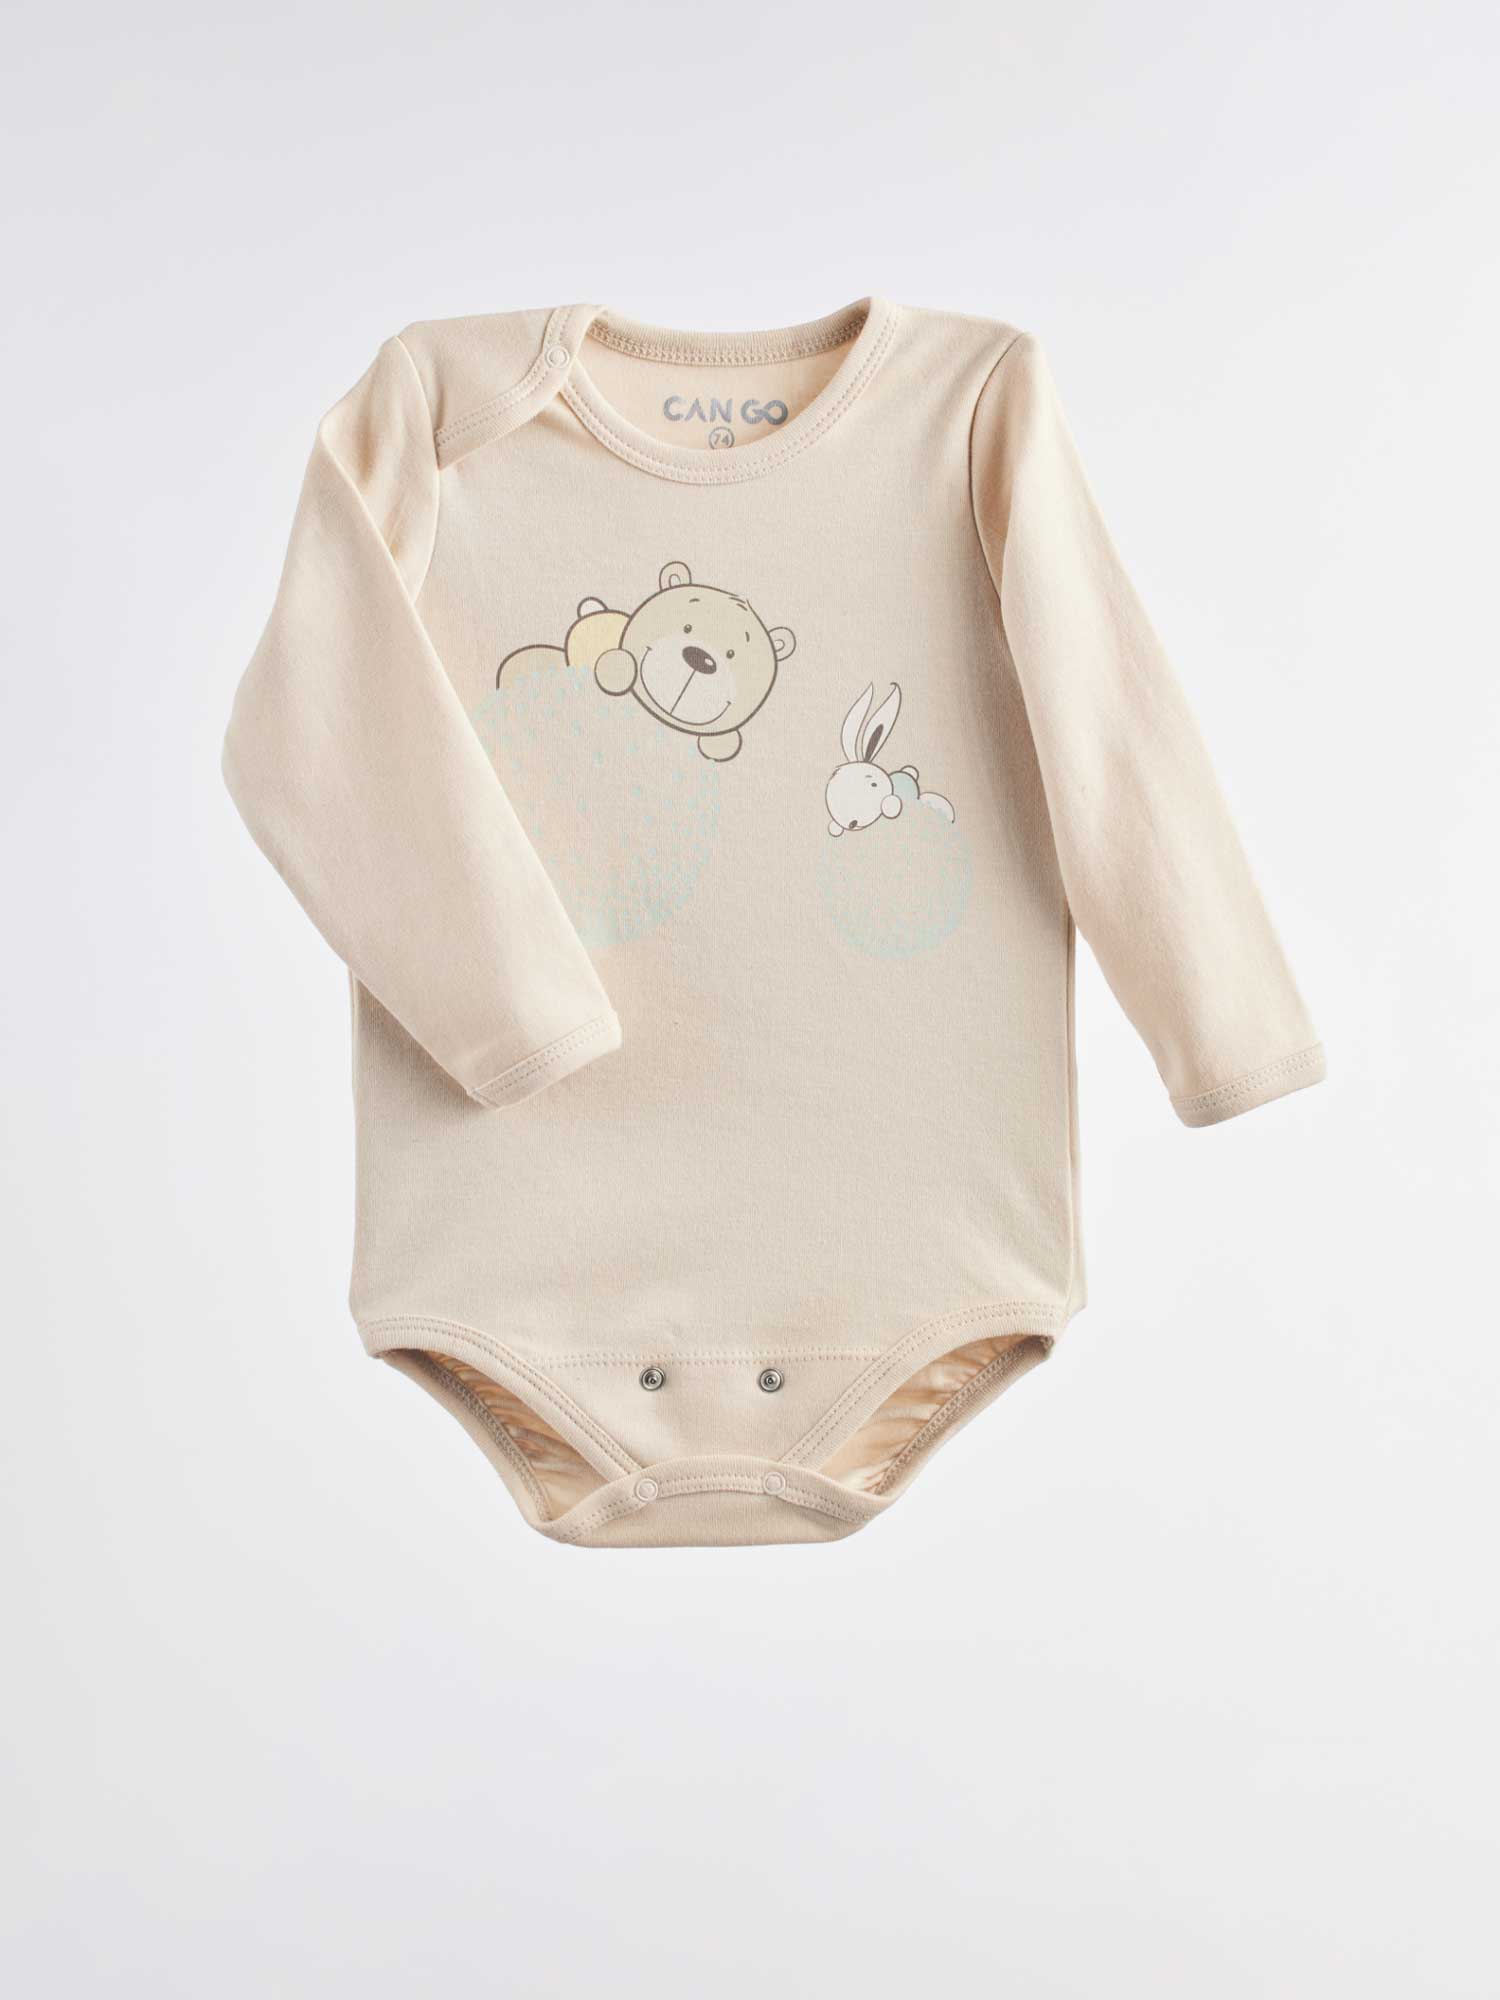 Infant bodysuit with cute bear and bunny images in warm and calm colors that you and your baby will adore!